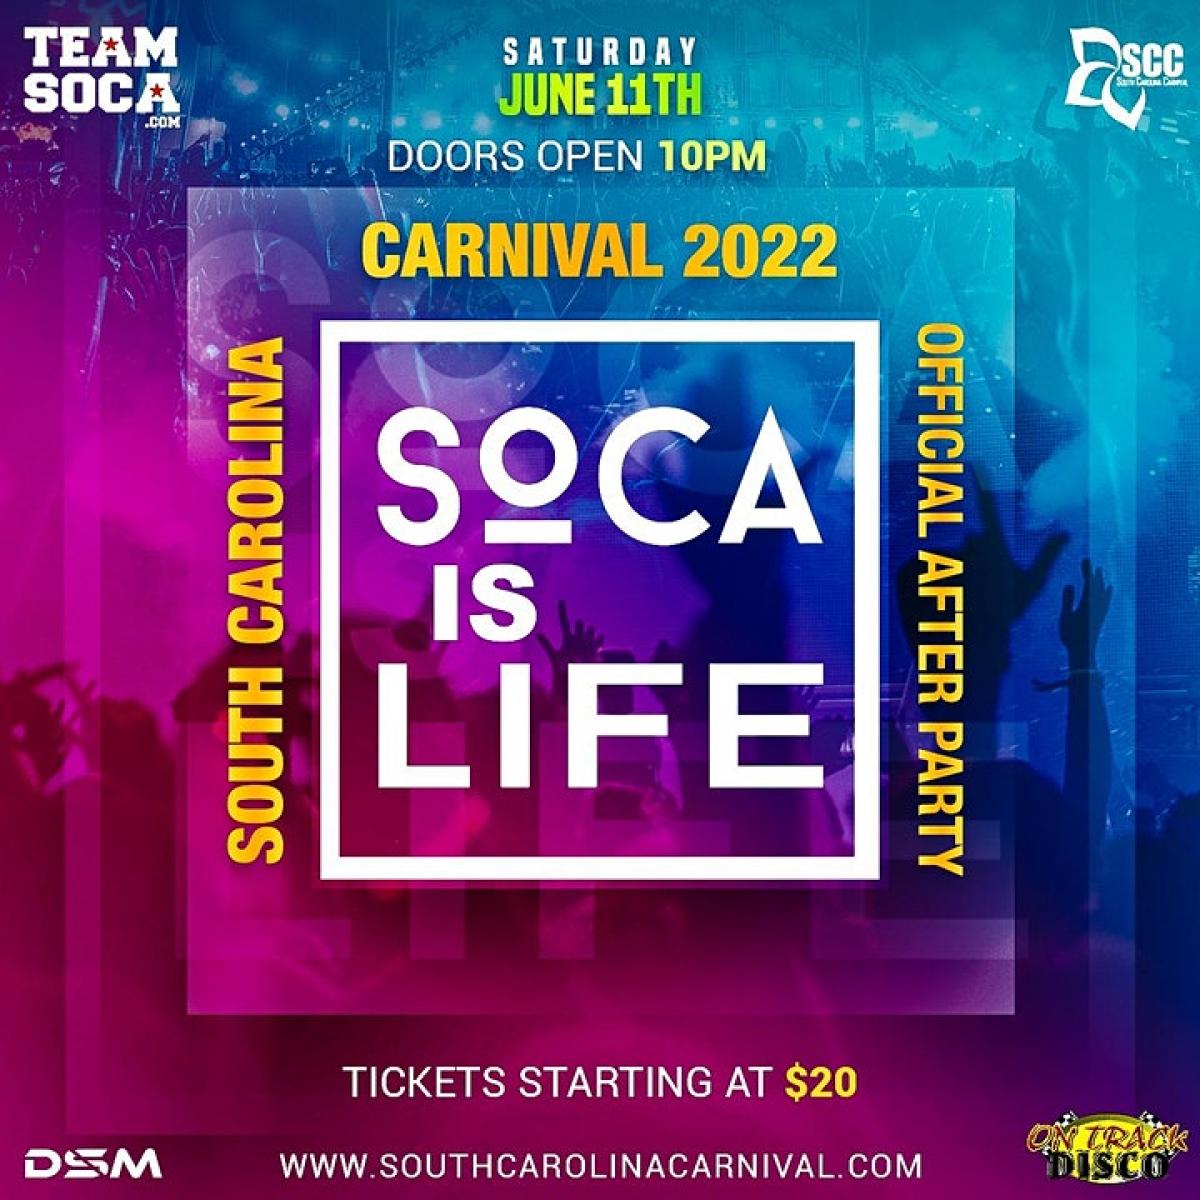 SOCA is LIFE- SCC After Party flyer or graphic.